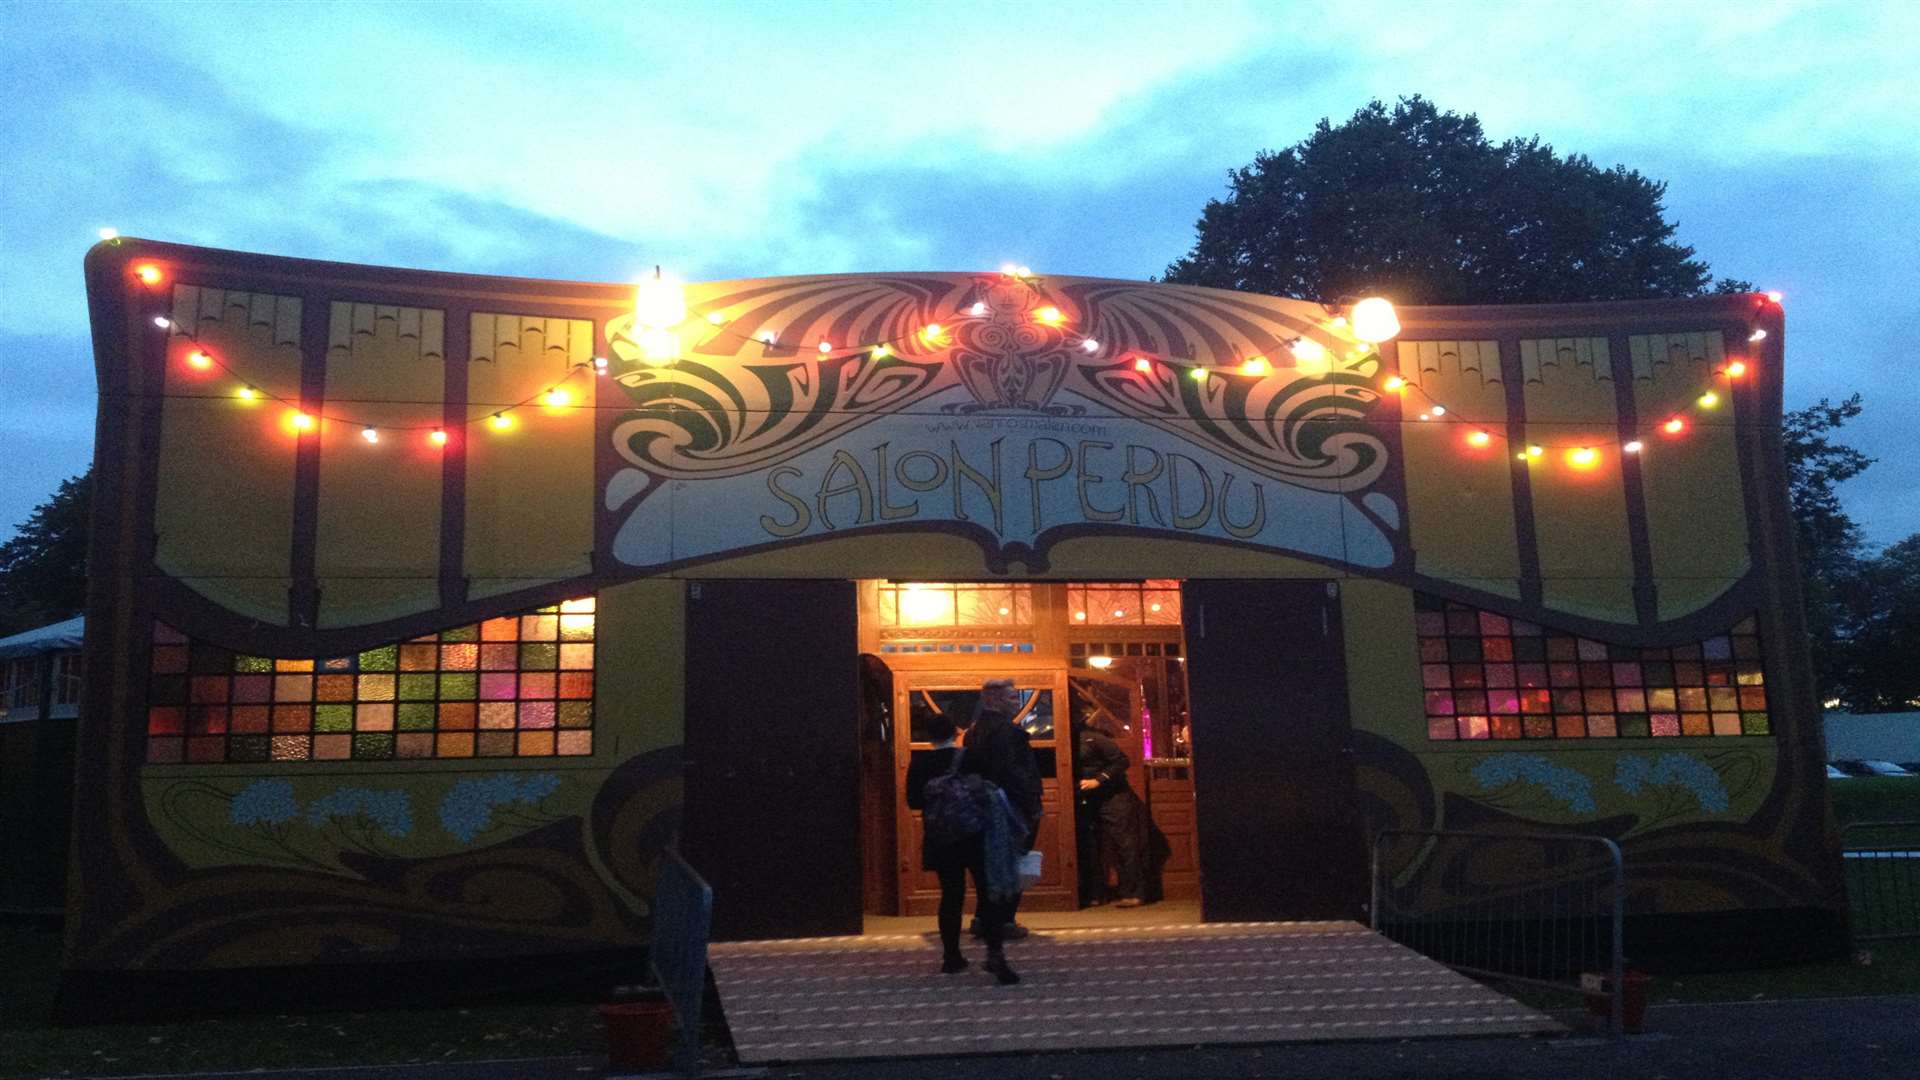 A fundraising campaign has succeeded to ensure the Canterbury Festival's Spiegeltent cabaret performance venue will return as one of its key attractions